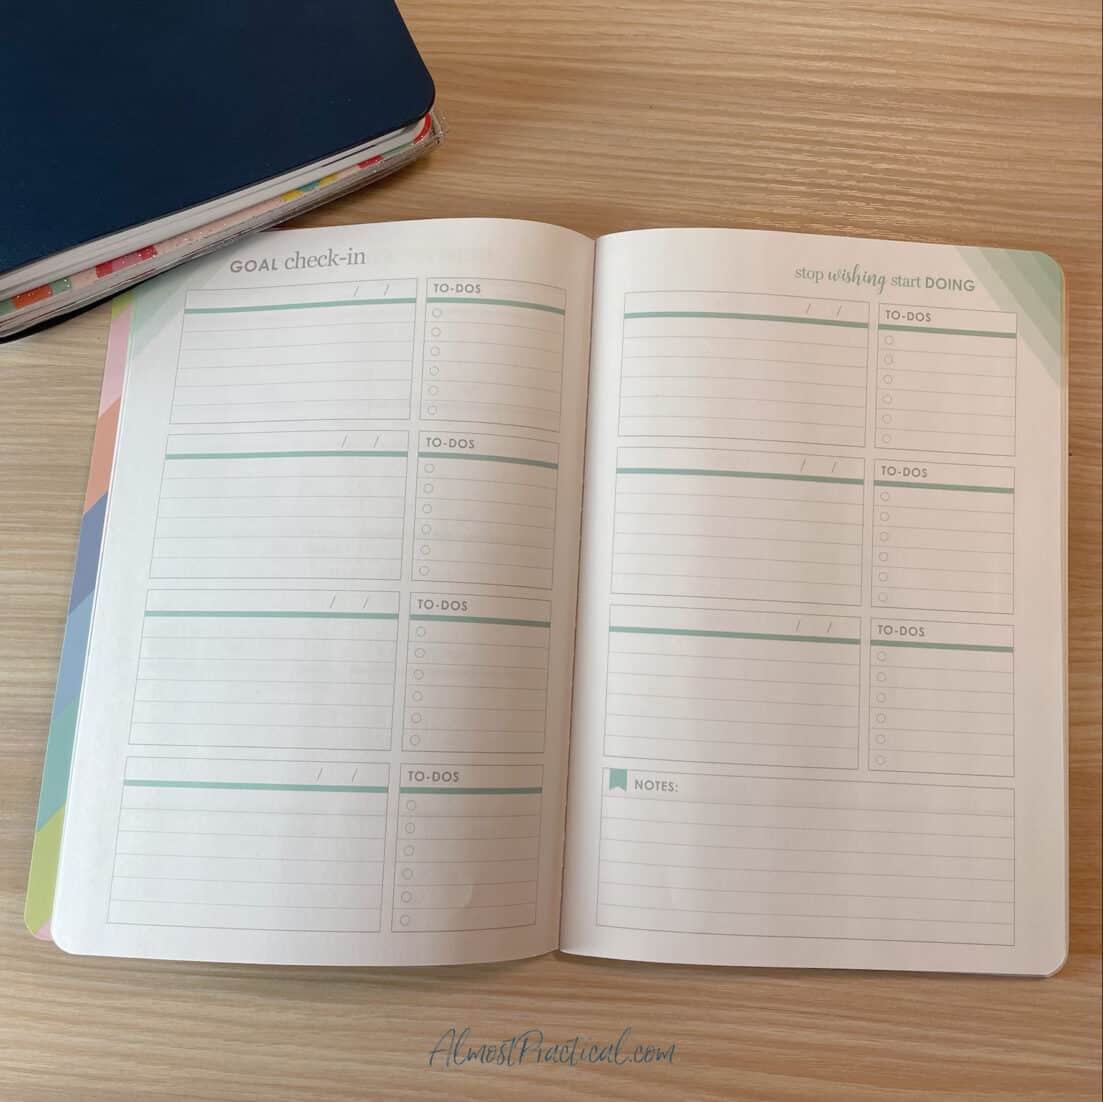 pages to track your progress towards your goal